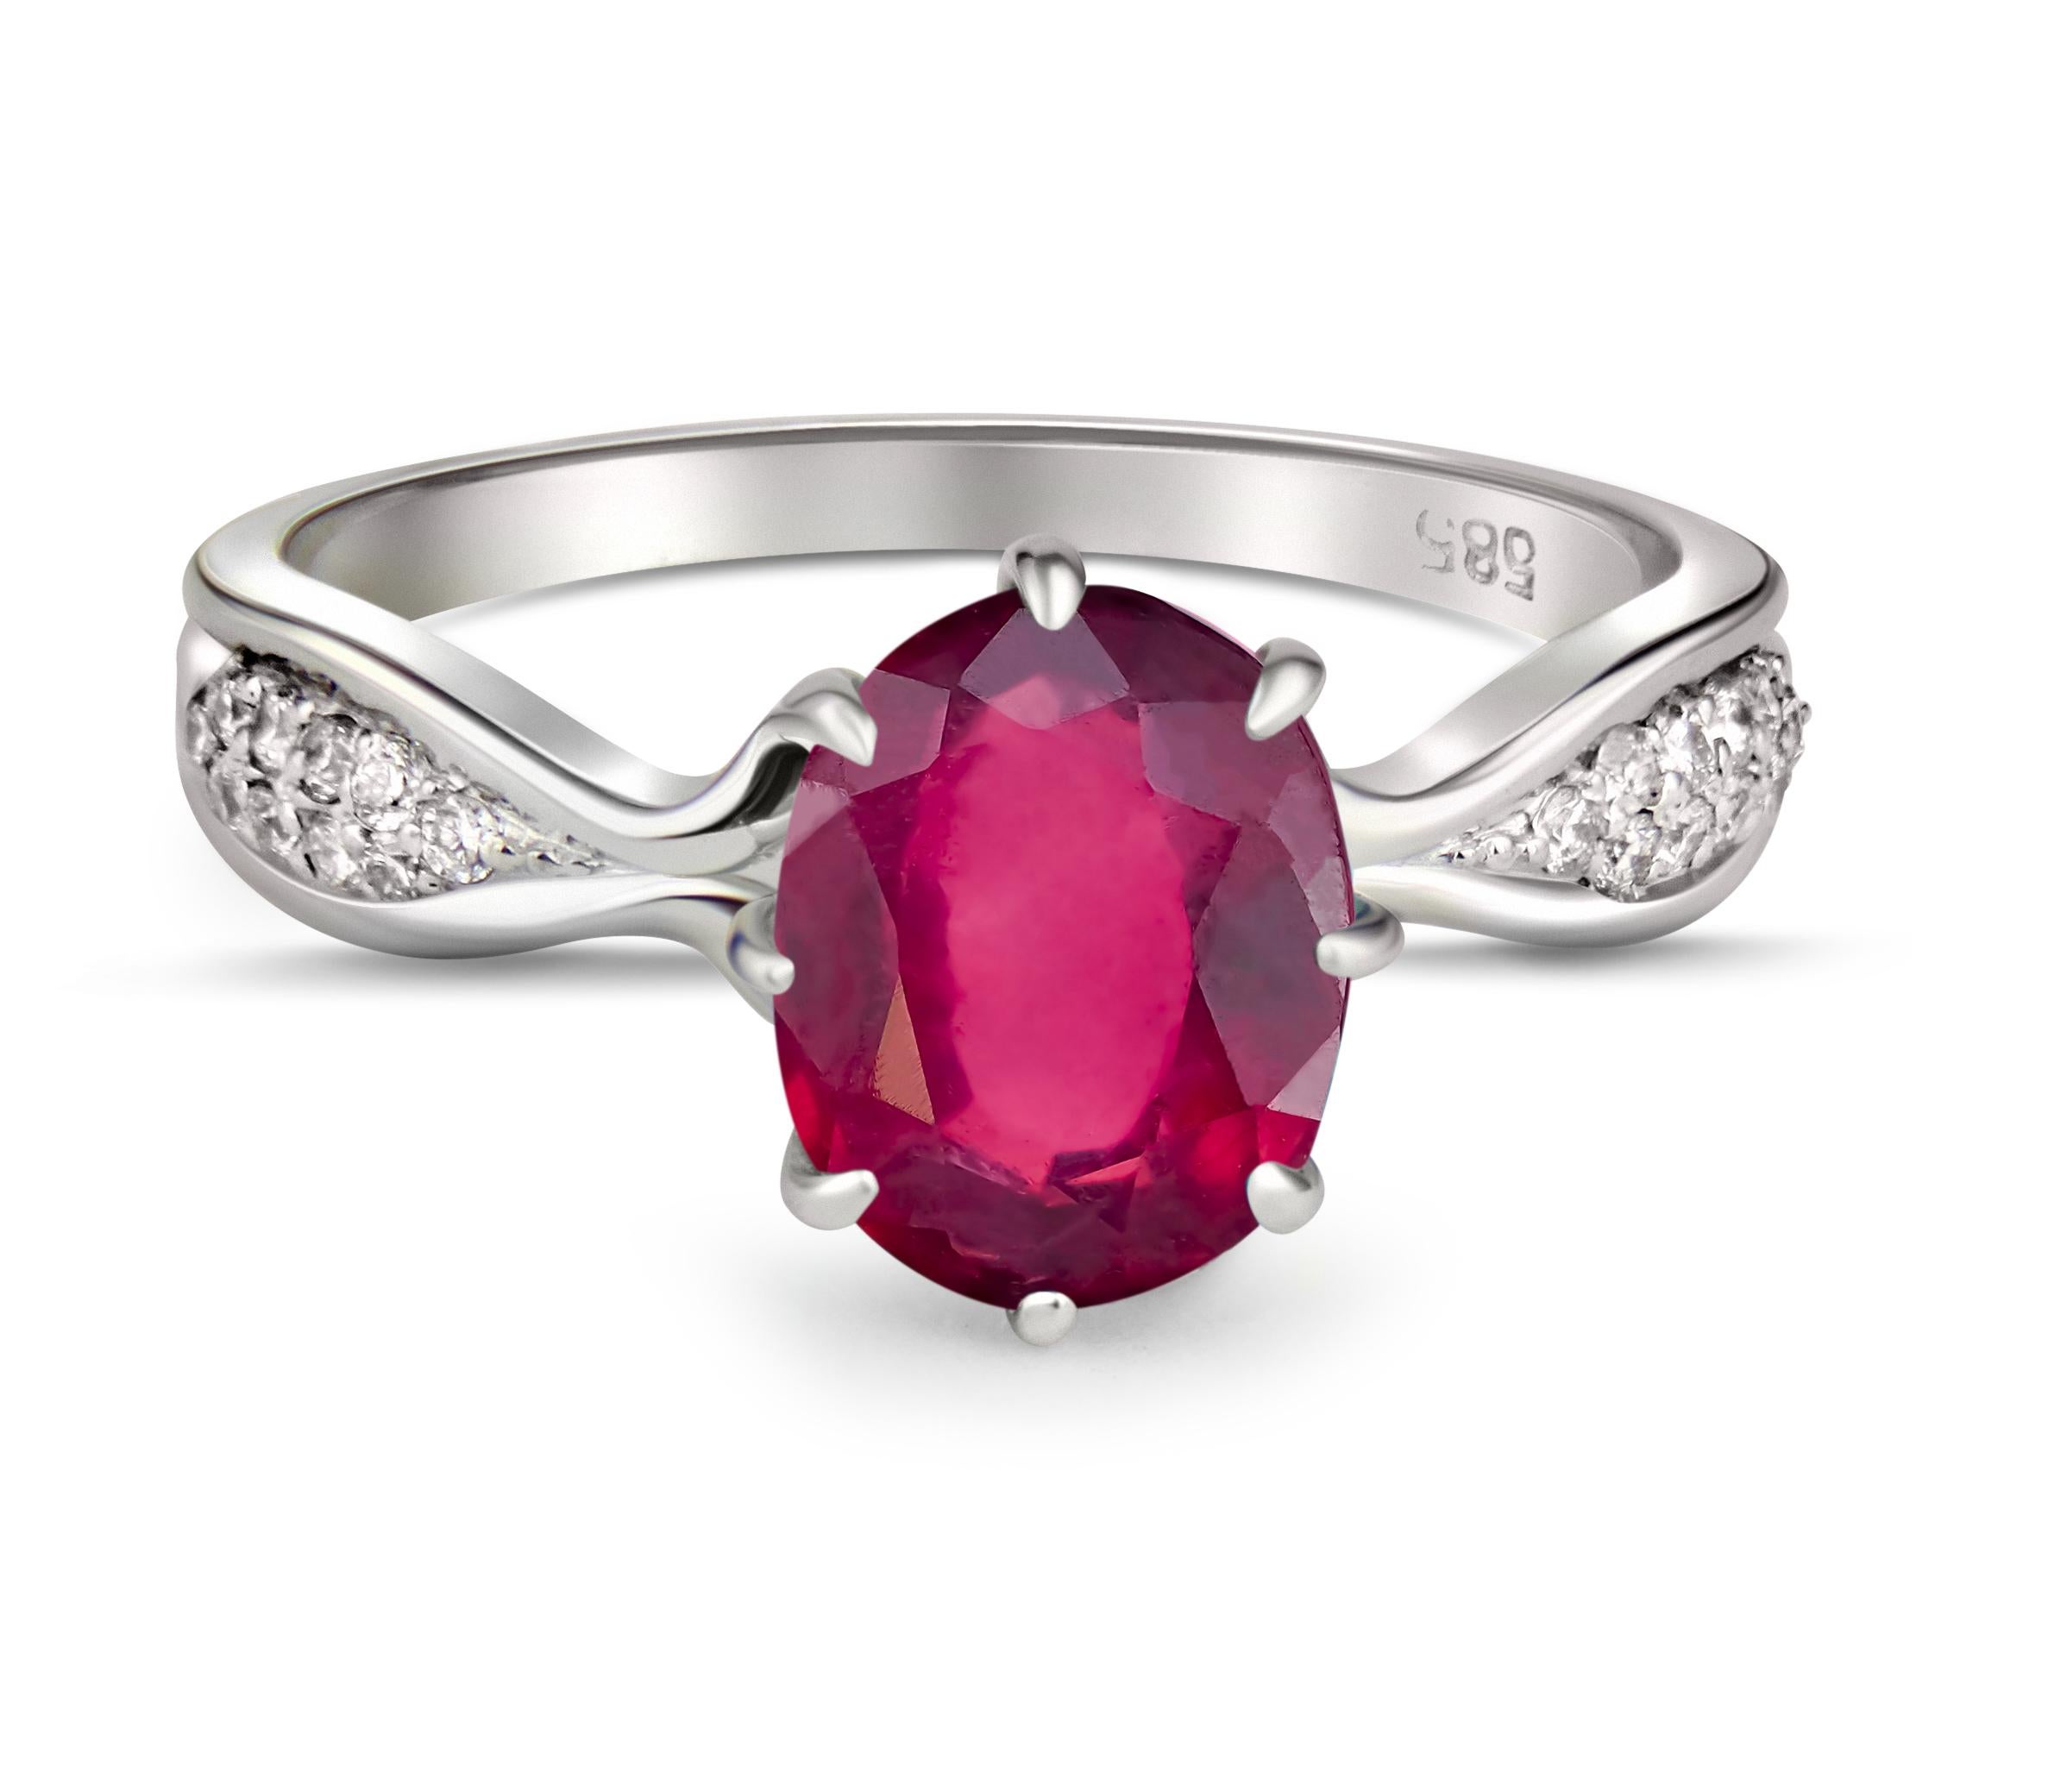 Ruby 14k gold ring. 
Oval Ruby ring. Ruby gold ring. Ruby vintage ring. Ruby engagement ring. July birthstone ring. Red gem ring.
 
Metal: 14k solid gold
Weight: 2.1 g (depends from size)

Main stone - Ruby, red color, oval cut, 0.8 ct weight, vs